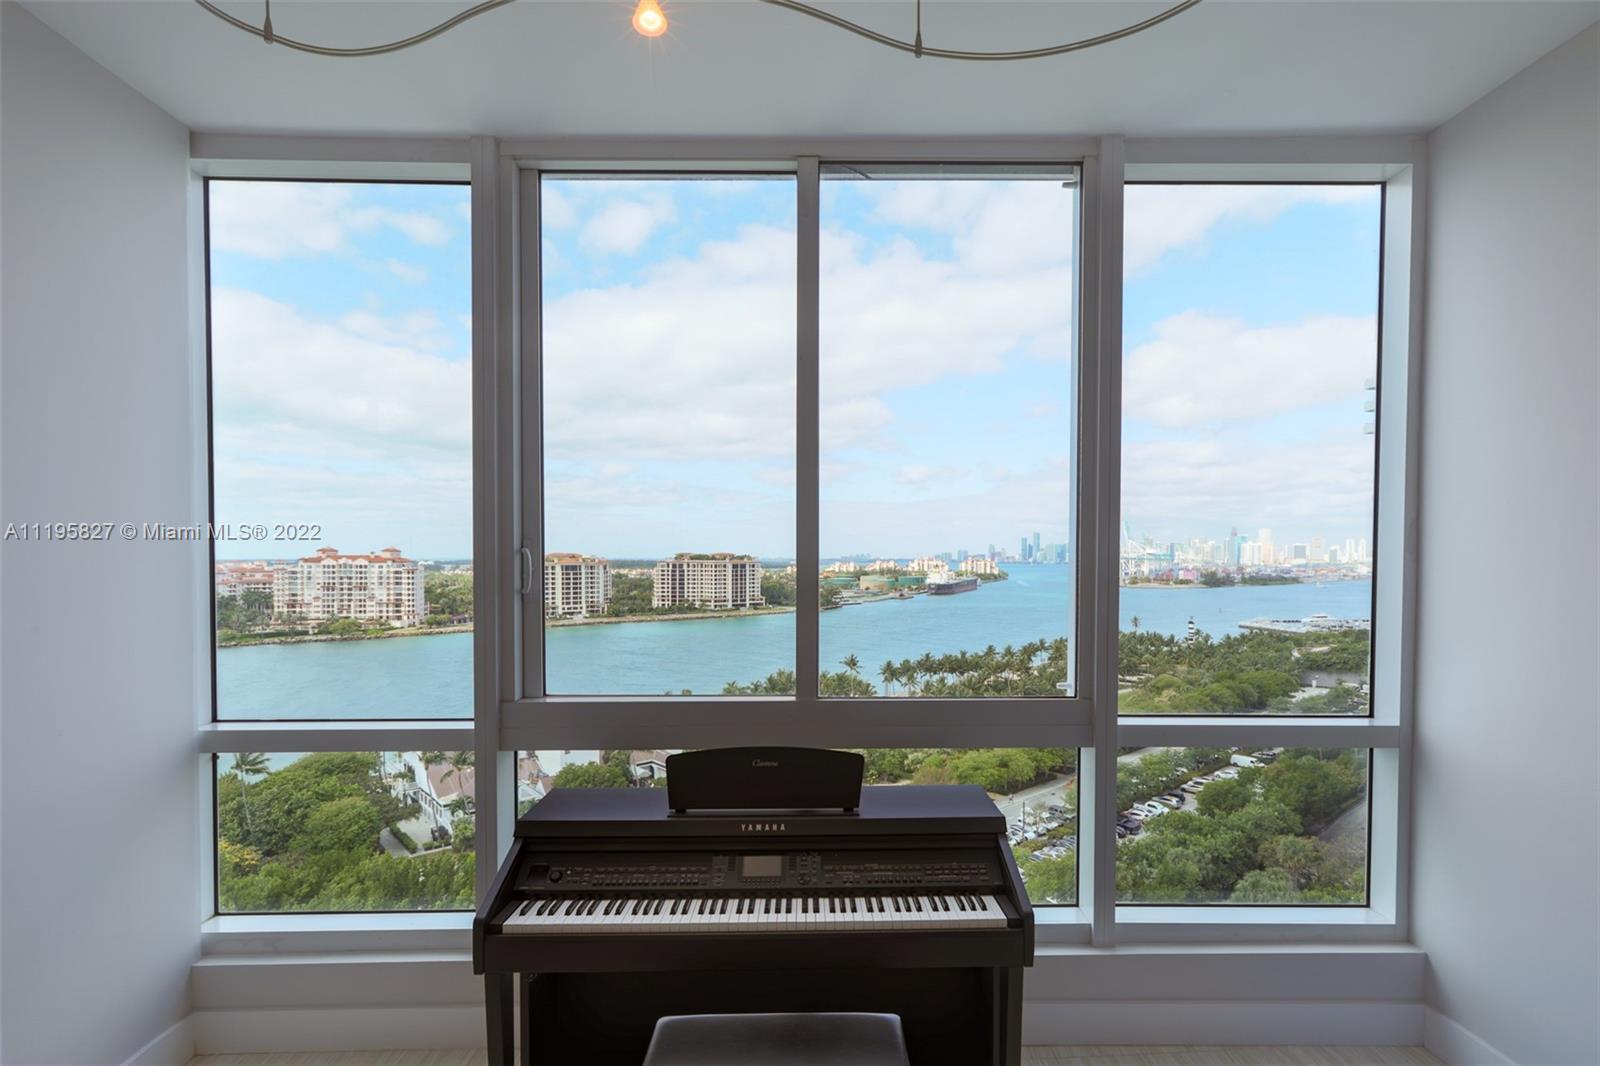 Welcome to the prestigious "South of Fifth" Continuum Tower, a luxury resort-style oceanfront condominium located on the southern-most tip of Miami Beach. This unit is located on the 14th floor with Private elevator/foyer access, has AMAZING views of Fisher Island, the ocean, and Downtown/Brickell Miami area!  Continuum is a full service luxury building with a top of the line beach club, direct beach access from 12 acres of lush gardens, 2 pools, a spa, a restaurant and many more fantastic amenities. You'll absolutely love living here and being a member of this exclusive community!